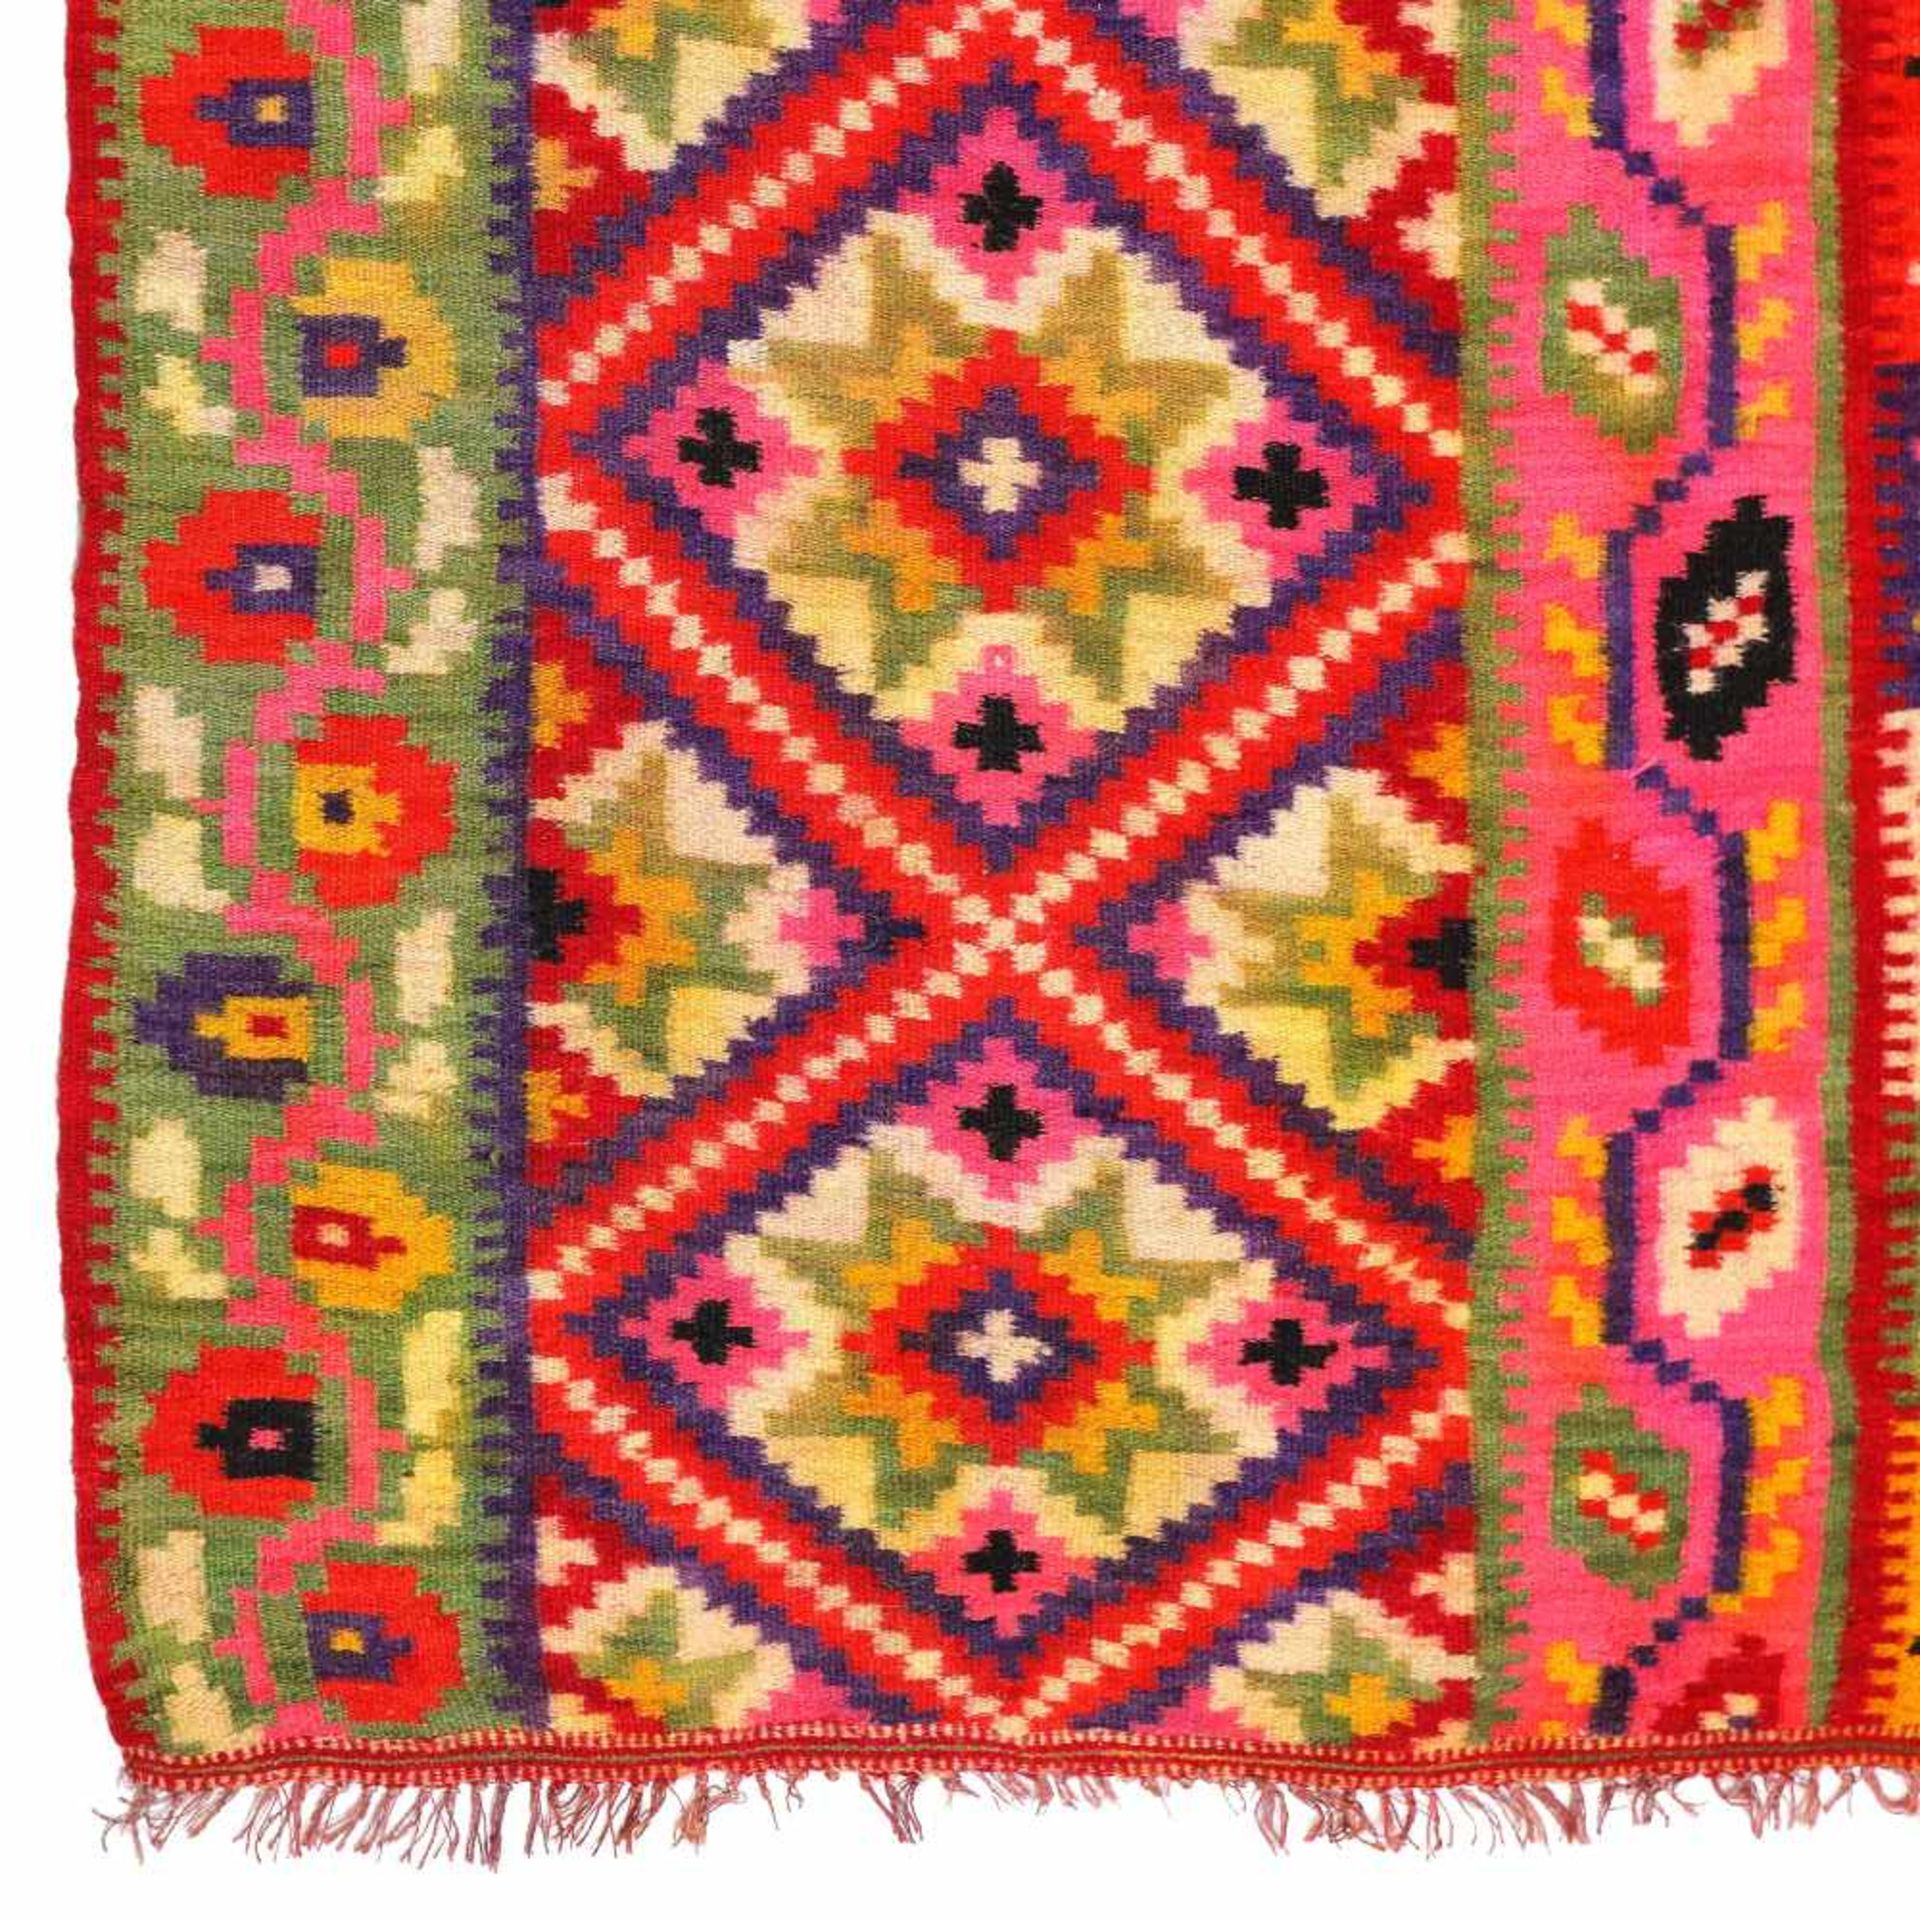 Rug decorated with the round-dance motif, Maramureș, early 20th century - Image 2 of 2